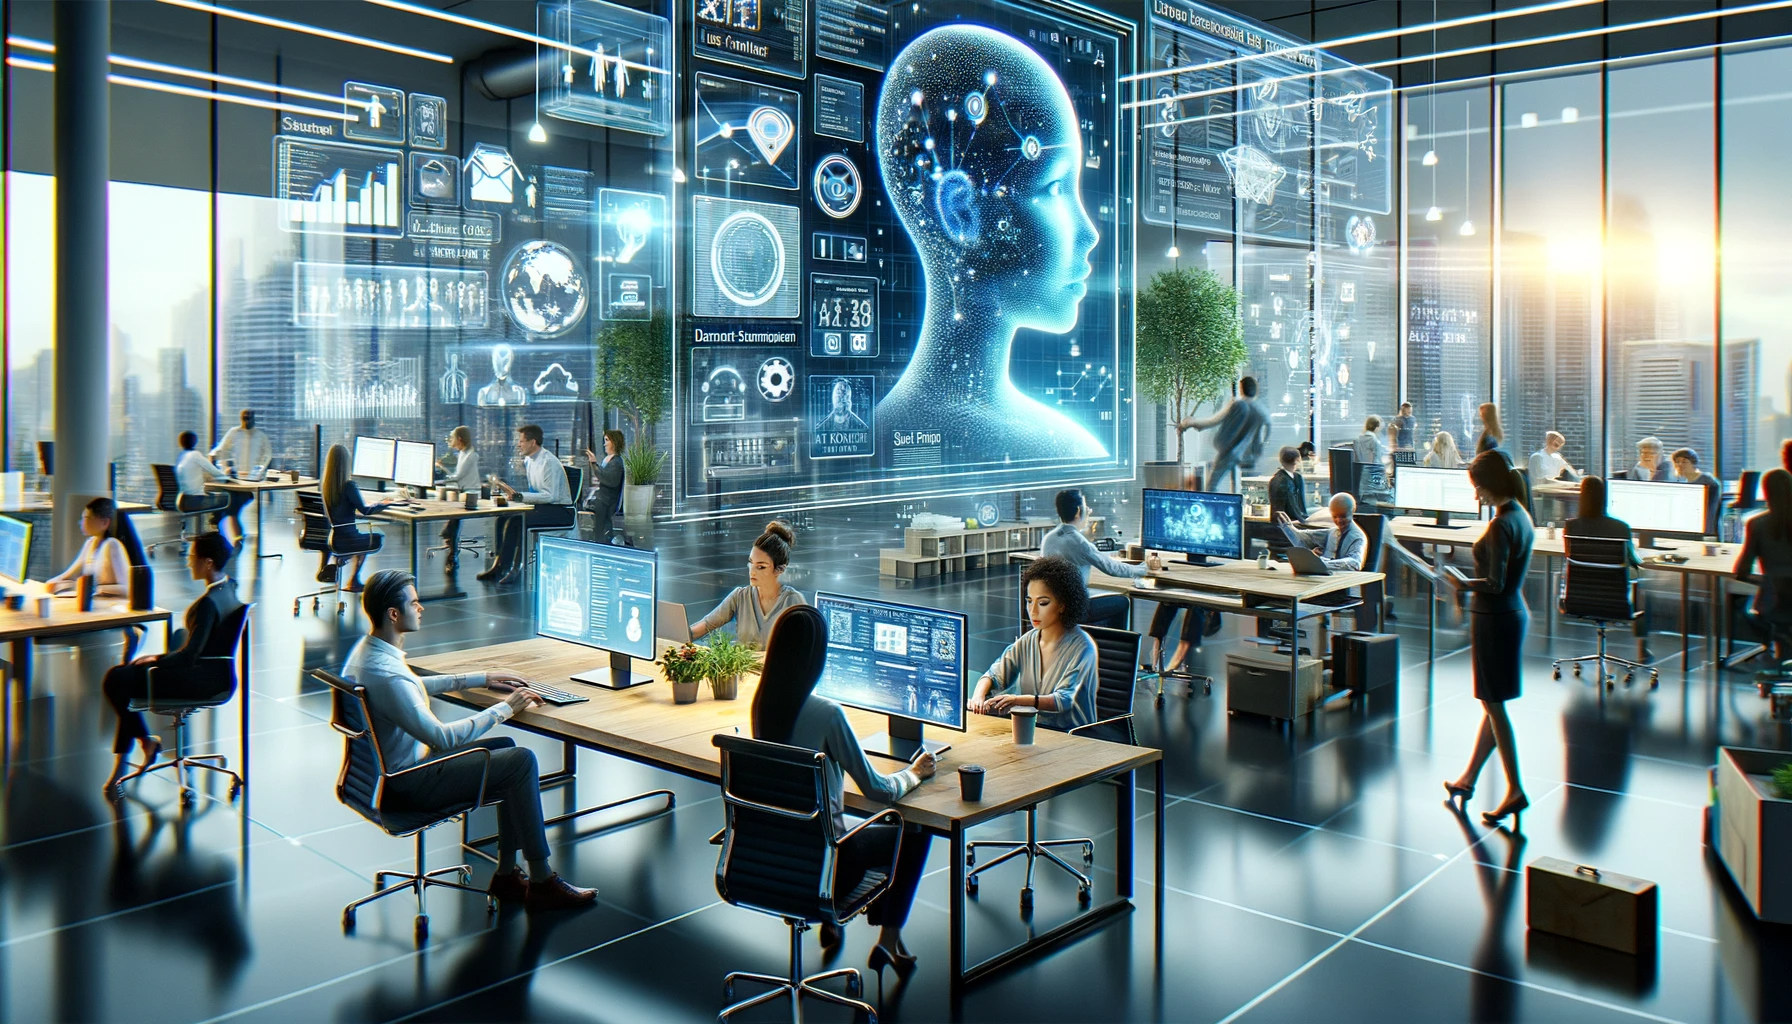 High-tech office with AI brain interface hologram, visualizing advanced AI integration in workplace efficiency.